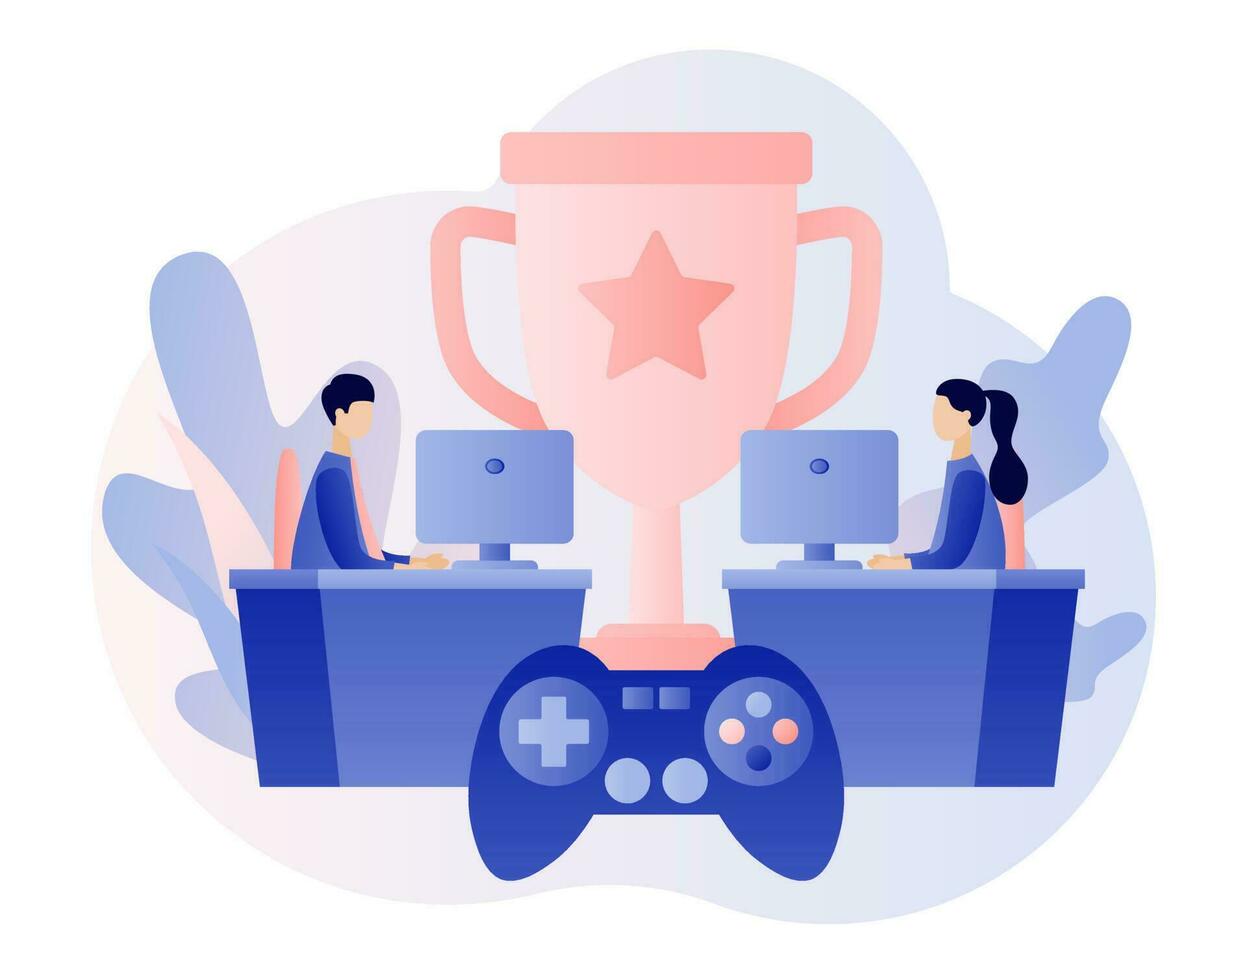 Professional gamers at video game online tournament competing for trophy. E-sport and cybersport concept. Modern flat cartoon style. Vector illustration on white background